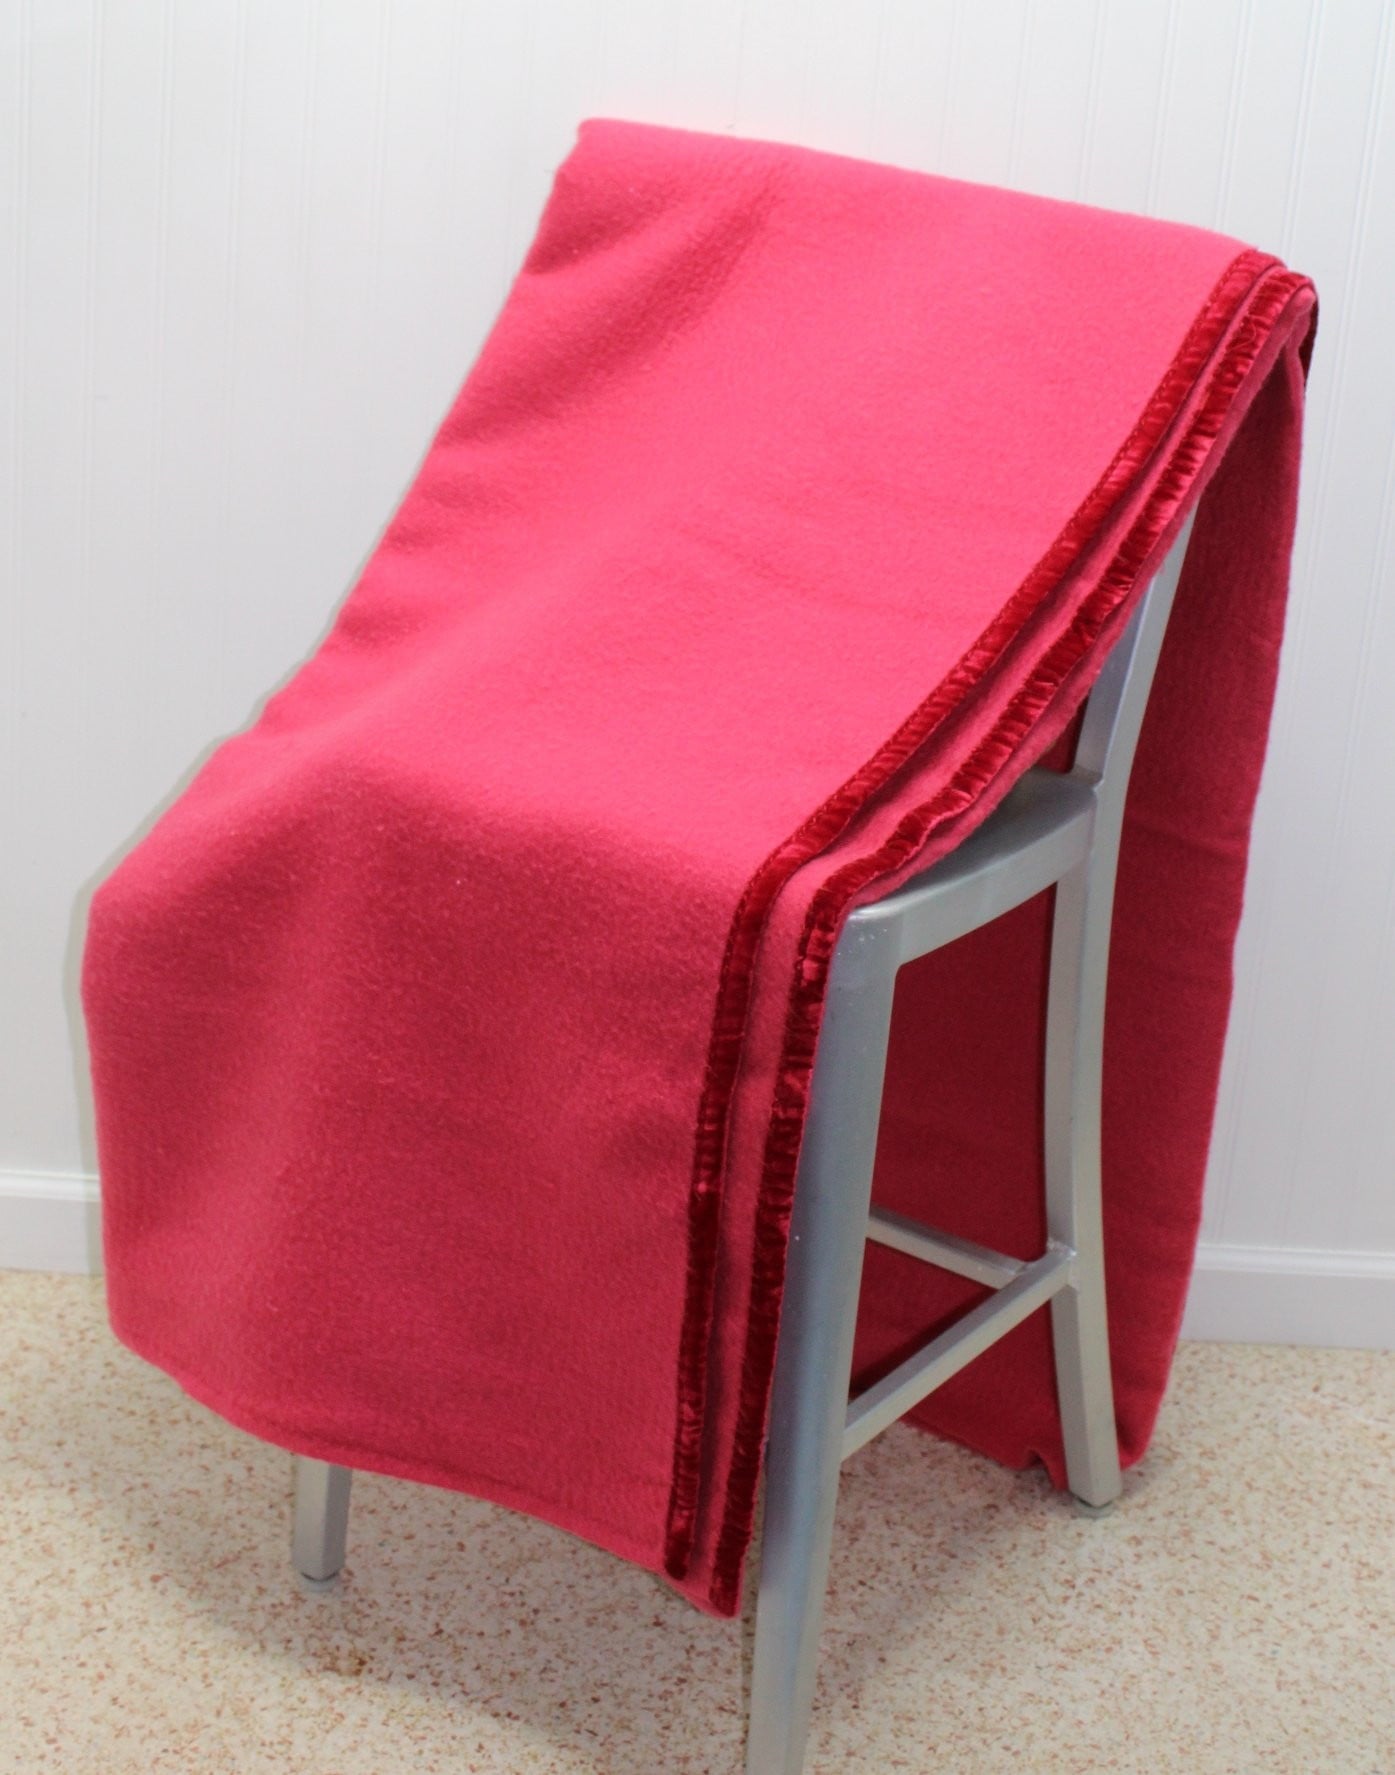 Vintage Blanket Rose Acrylic-Poly blend with Matching Velveteen Binding 78" X 86" Washable layering blanket